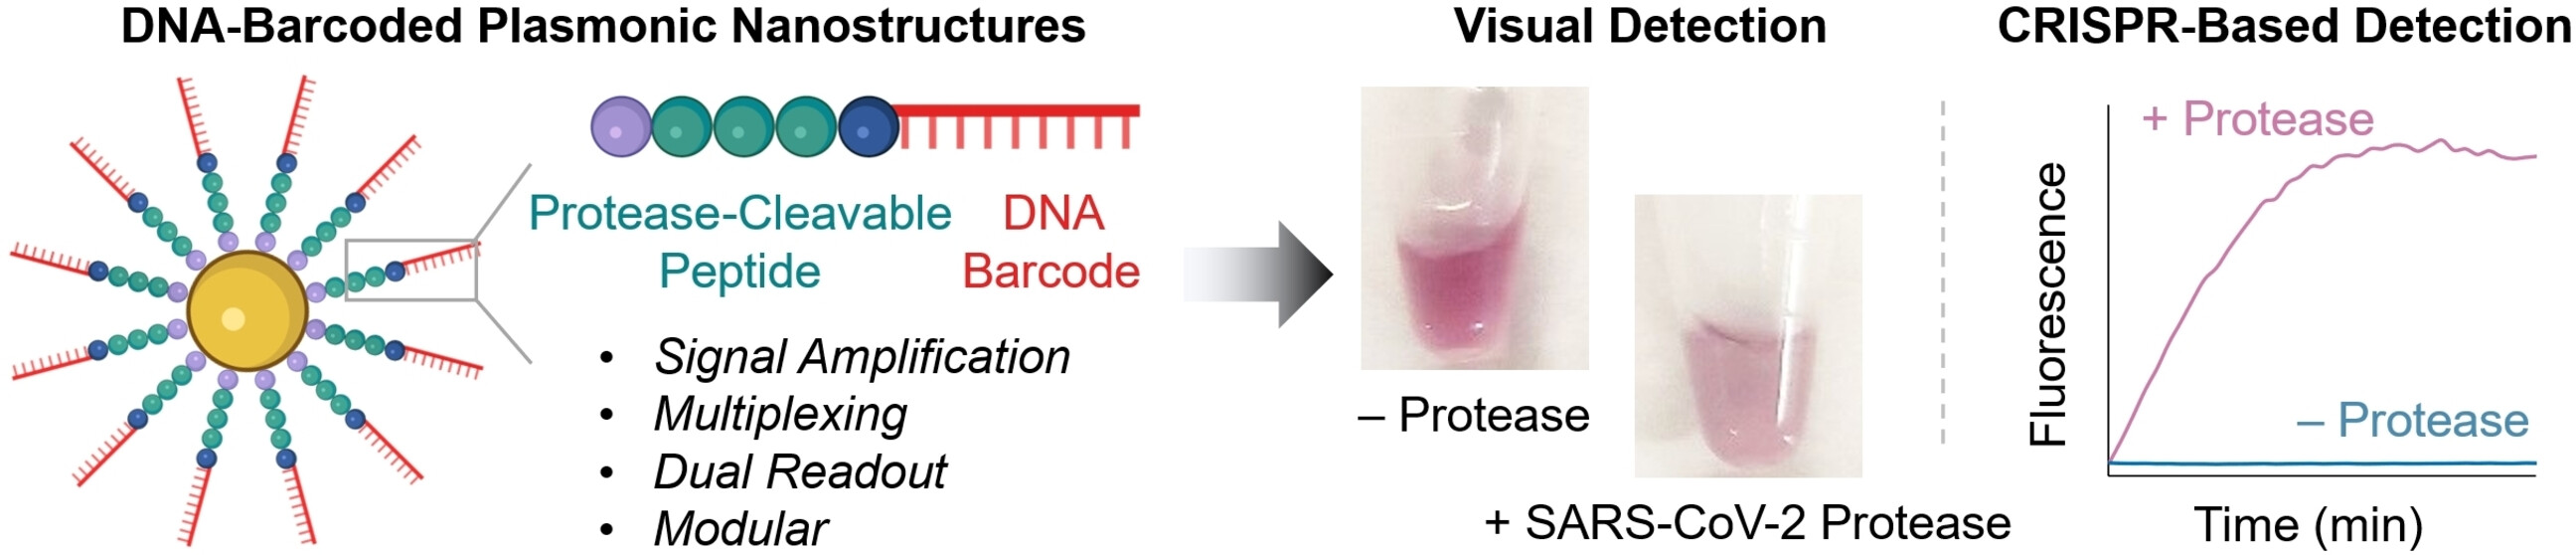 DNA-Barcoded Plasmonic Nanostructures for Activity-Based Protease Sensing